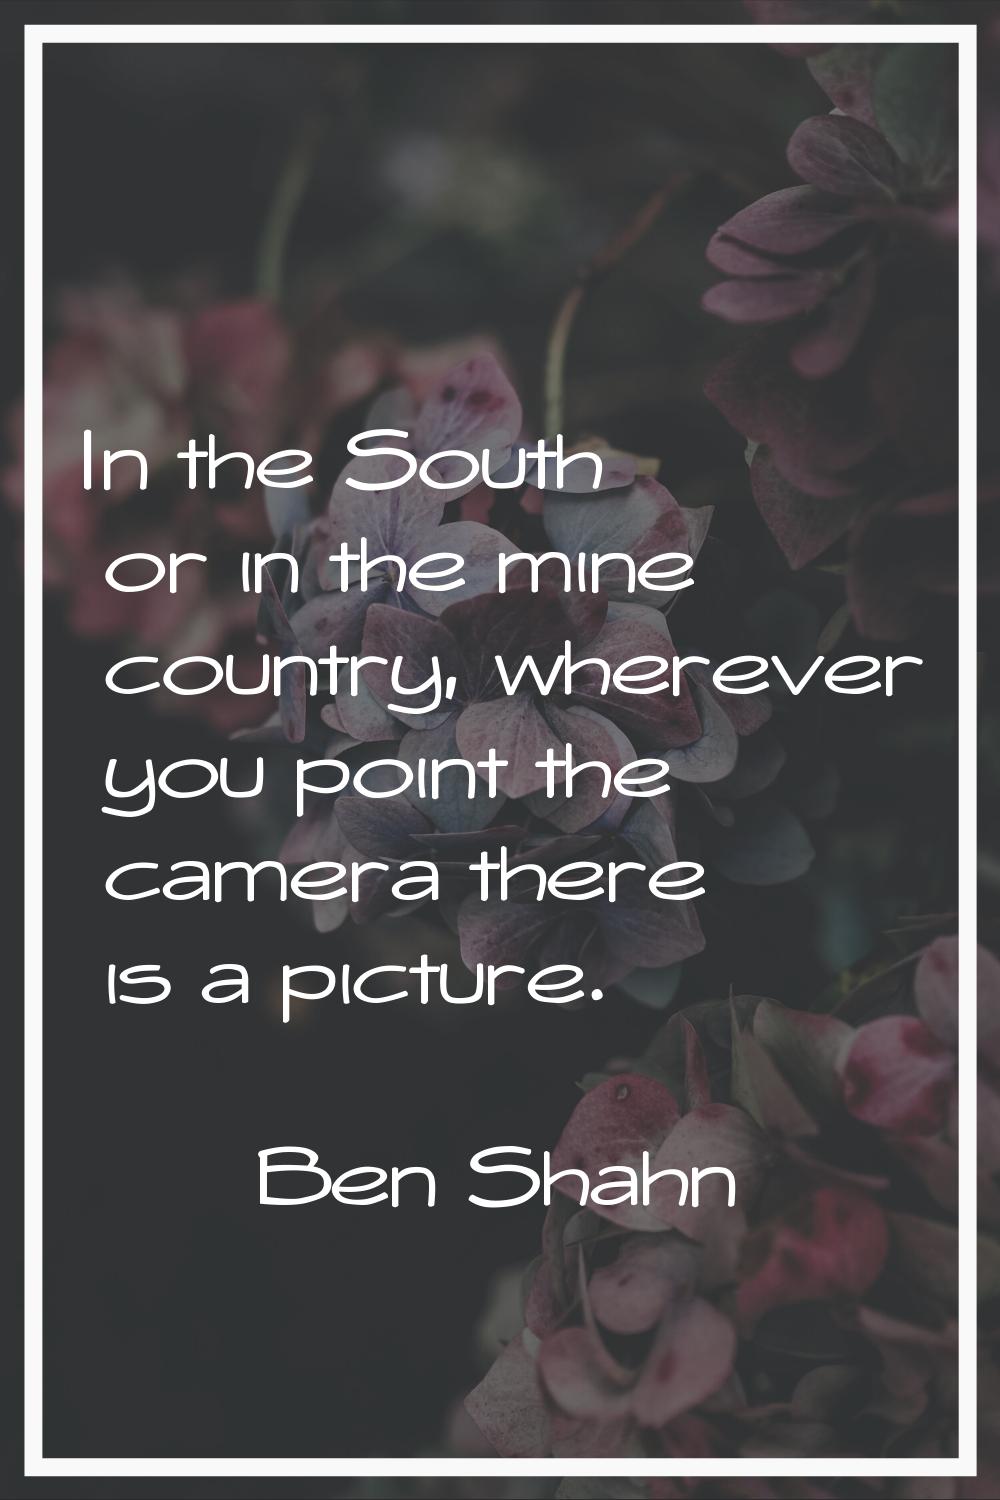 In the South or in the mine country, wherever you point the camera there is a picture.